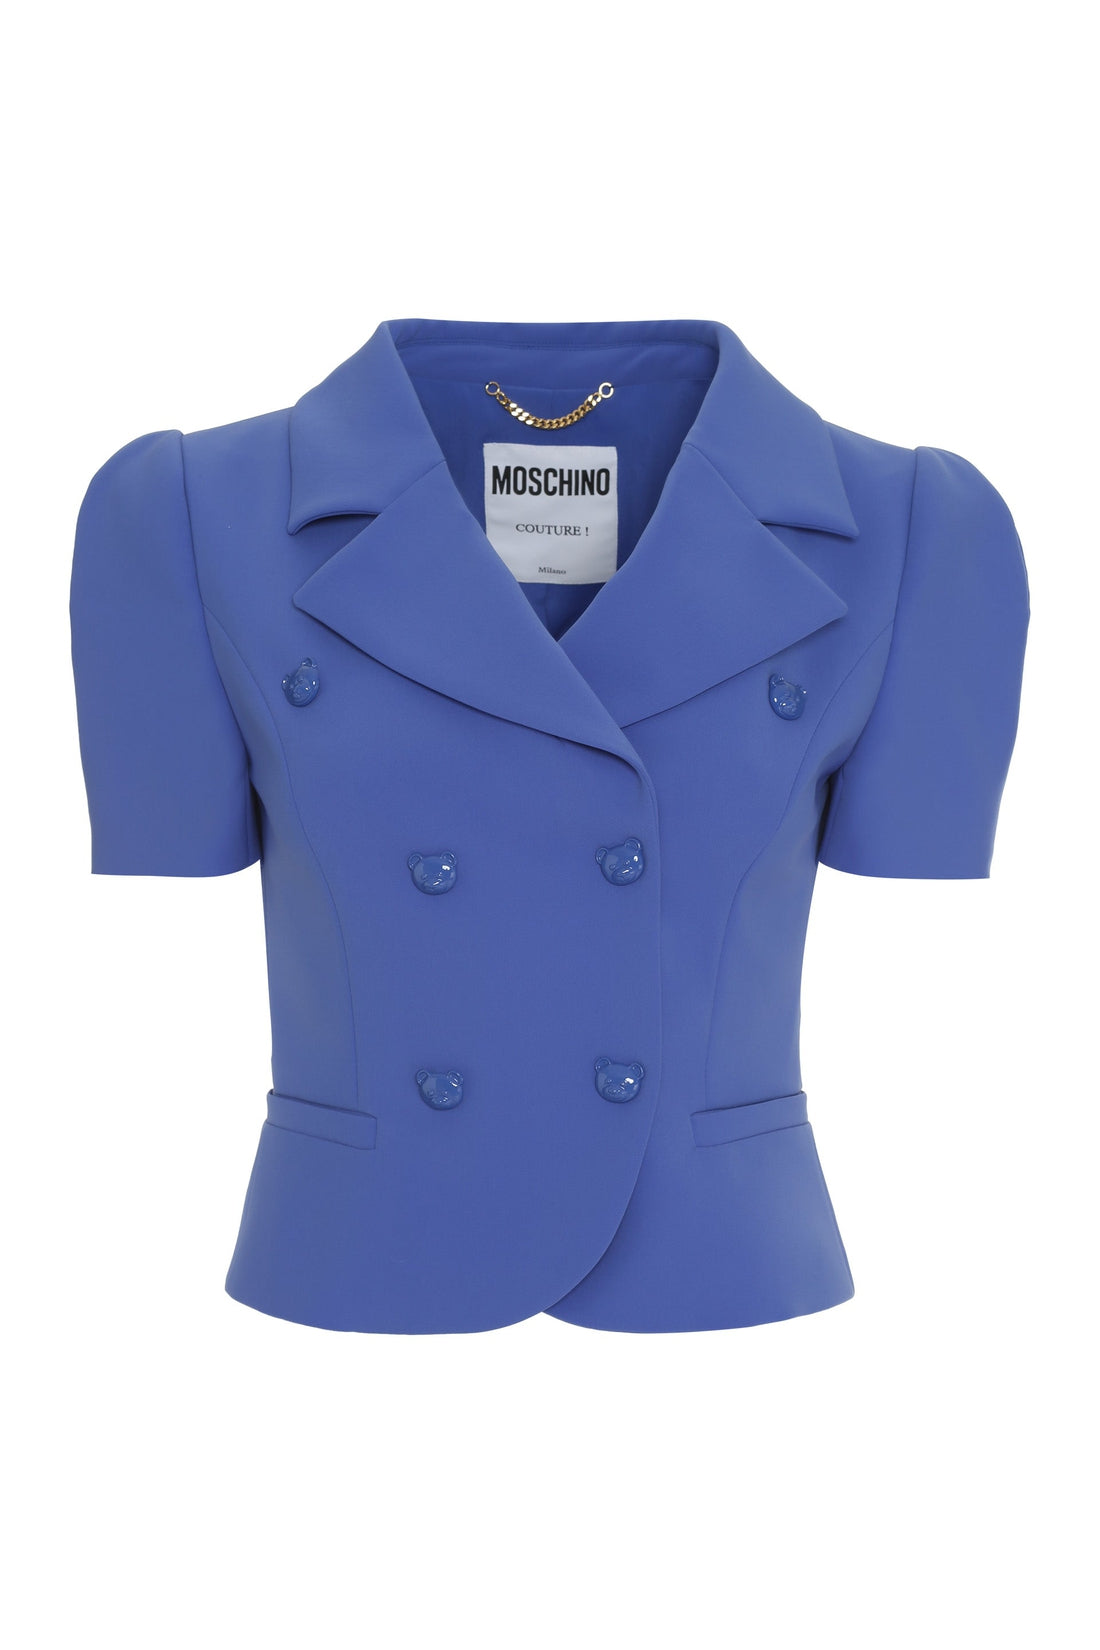 Moschino-OUTLET-SALE-Silk blouse-ARCHIVIST